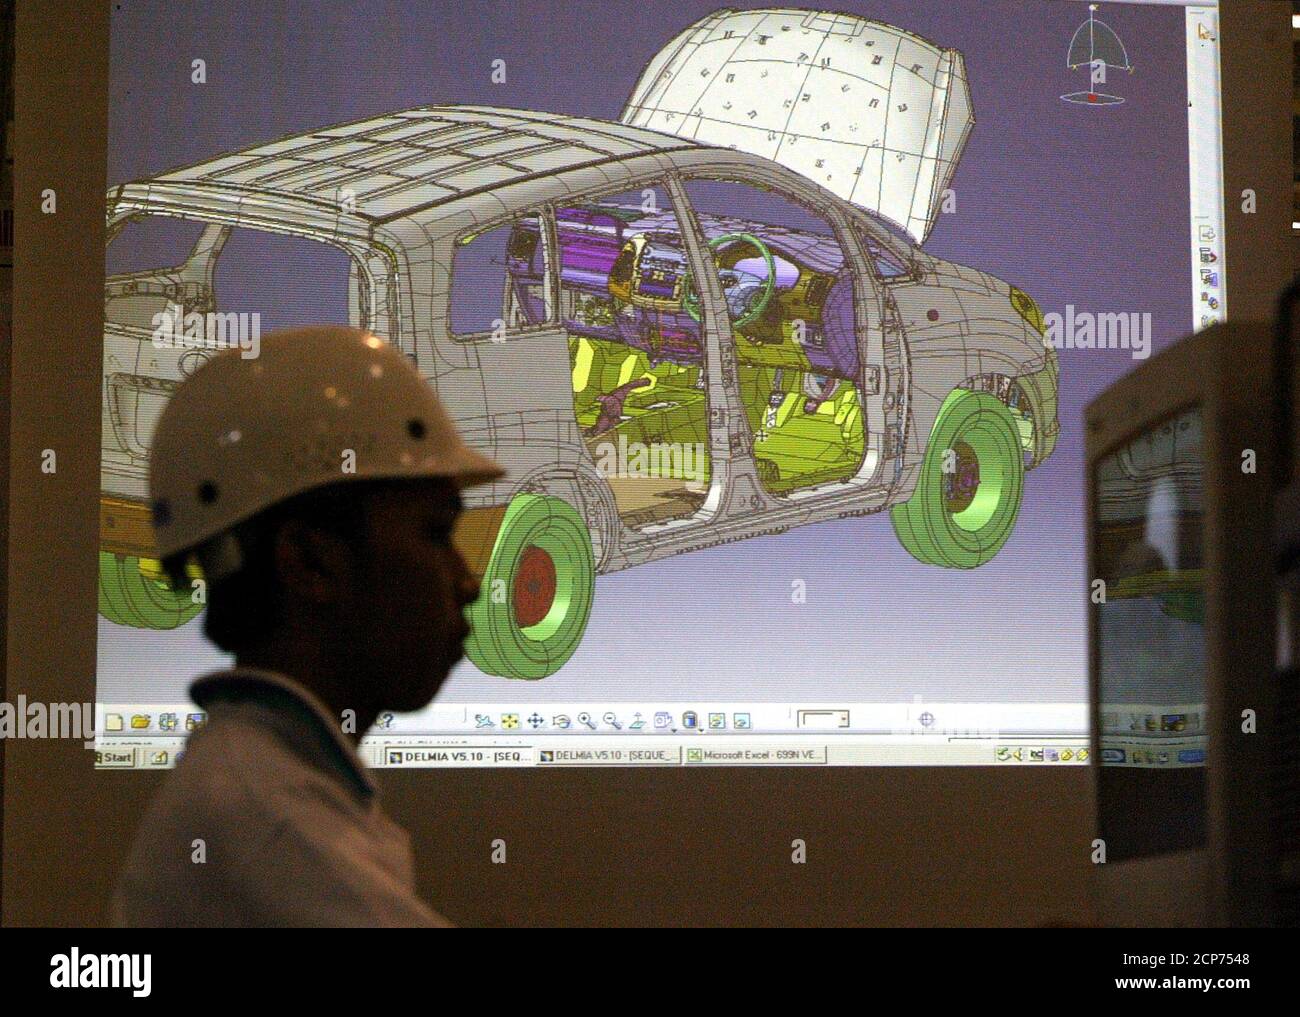 An Indonesian worker reviews a schematic design of a new multi-purpose vehicle, called Kijang Innova, at the Toyota plant in Karawang, West Java province on September 1, 2004. Indonesia's leading auto distributor, PT Astra International Tbk, launched a new generation of its best selling car on Wednesday. REUTERS/Beawiharta  REUTERS/Beawiharta Stock Photo